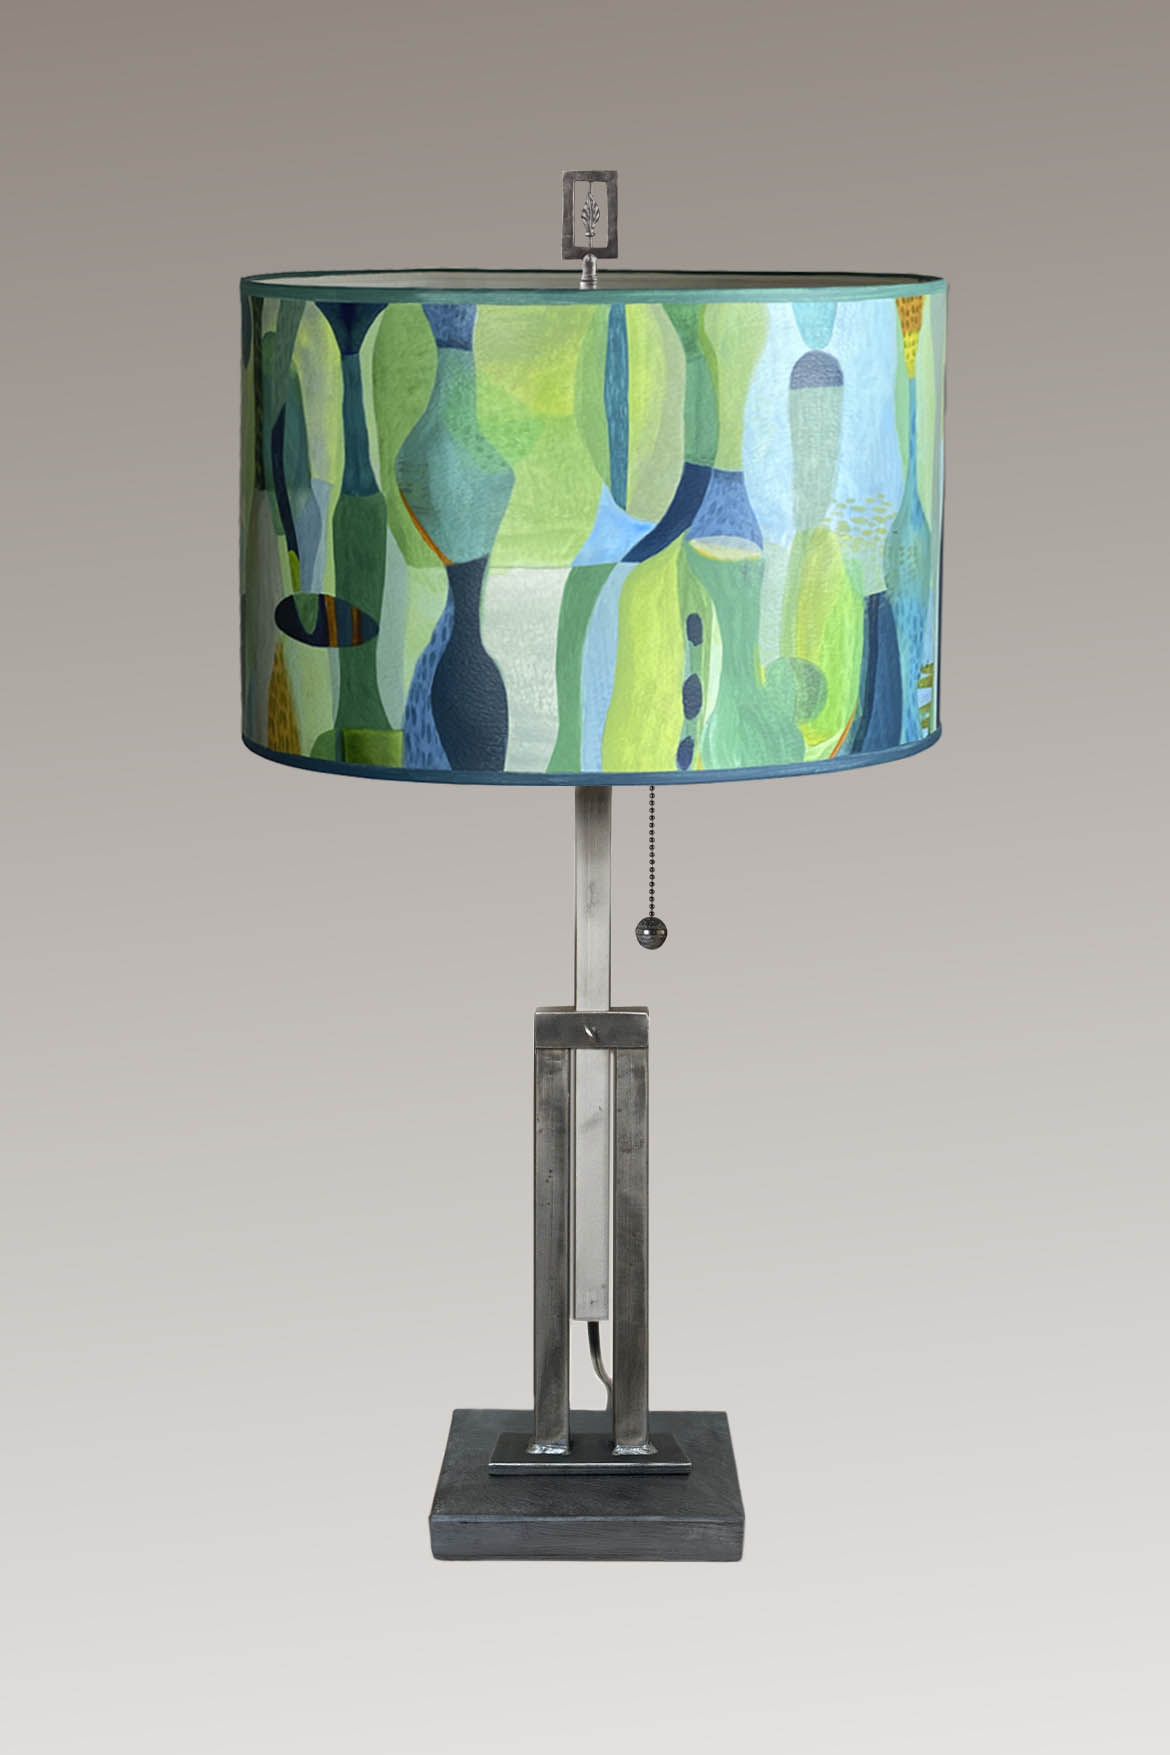 Janna Ugone & Co Table Lamp Adjustable-Height Steel Table Lamp with Large Drum Shade in Riviera in Citrus